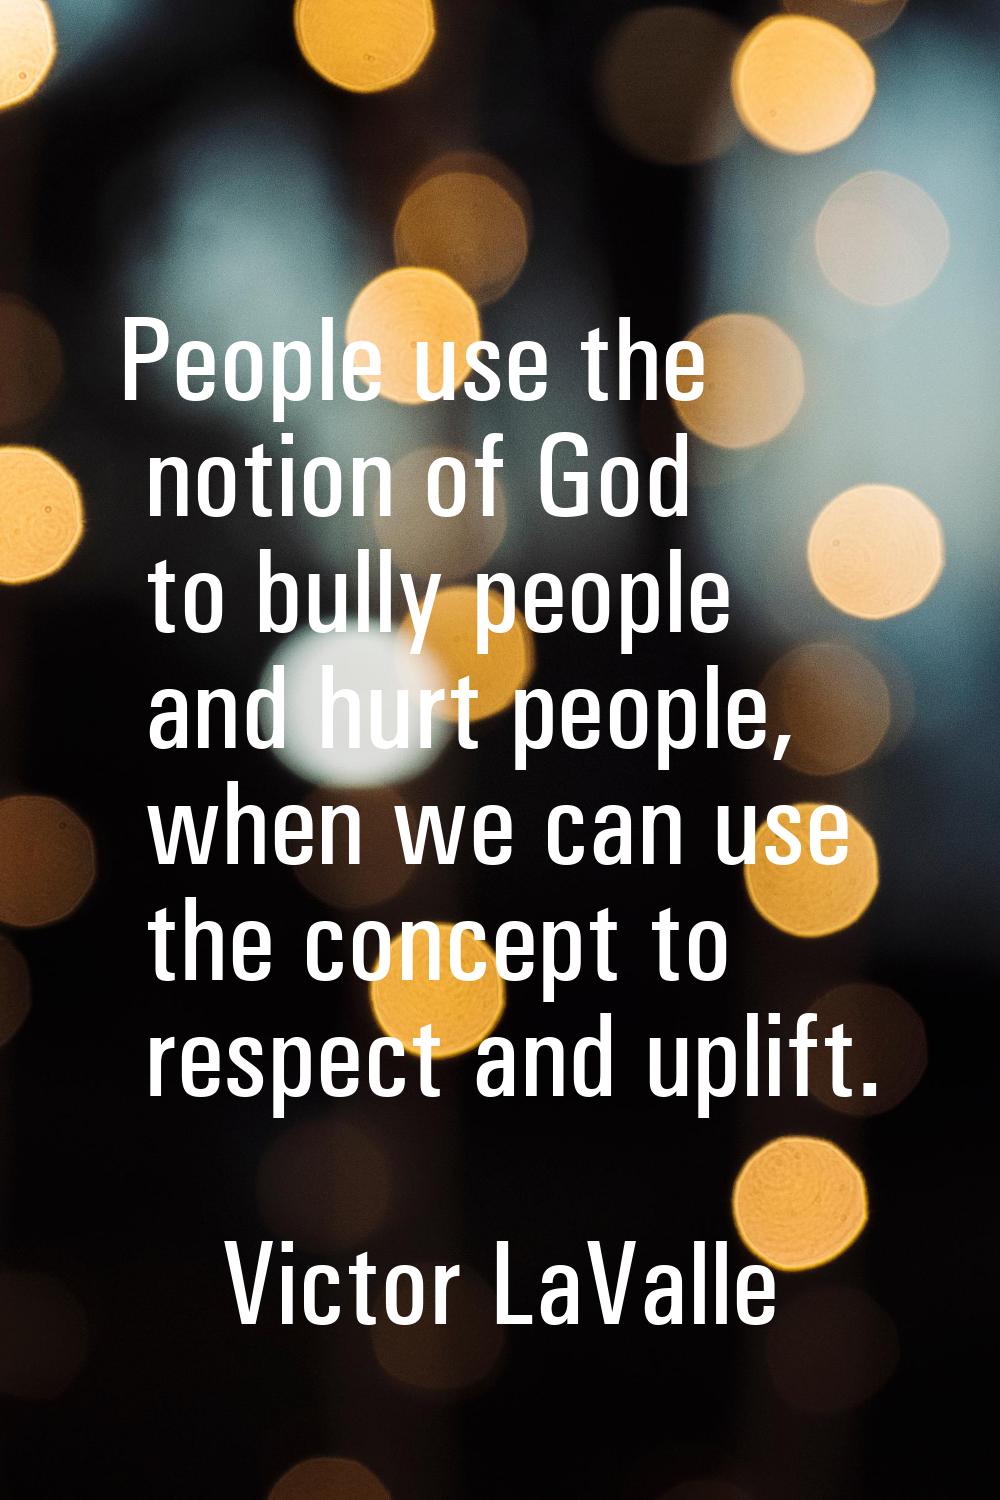 People use the notion of God to bully people and hurt people, when we can use the concept to respec